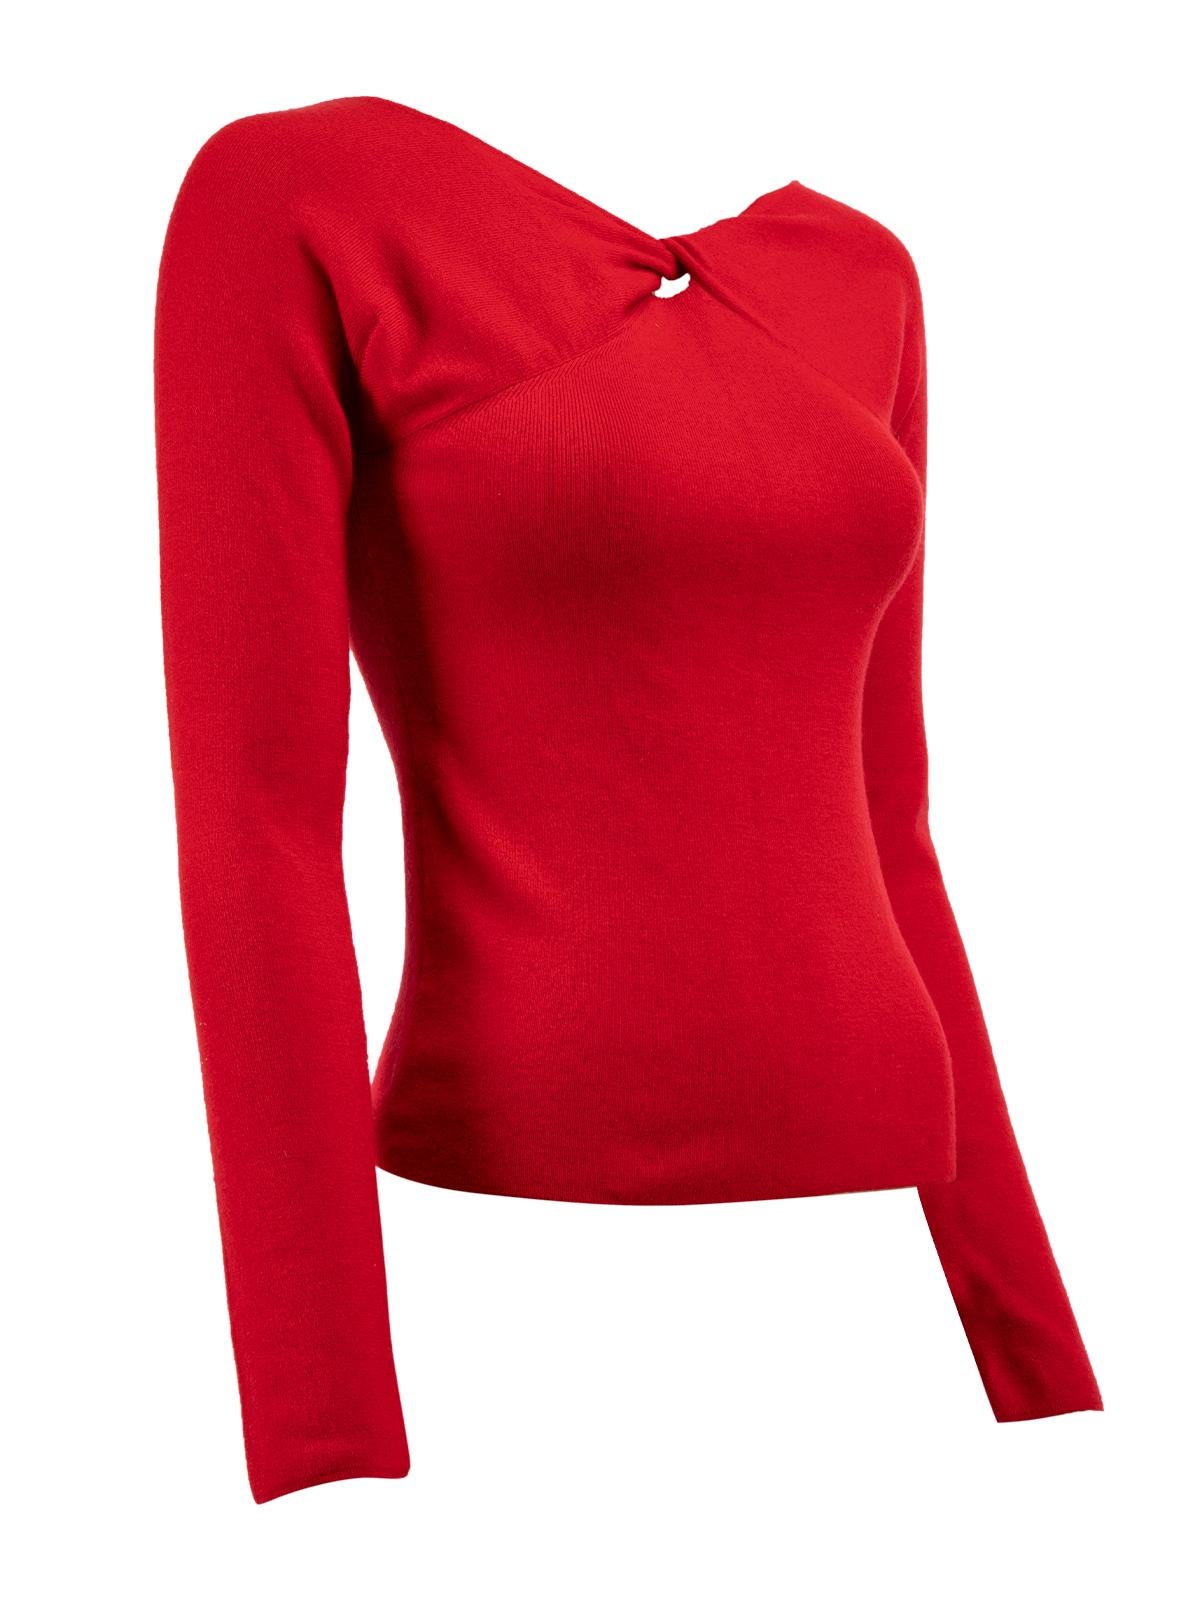 CONDITION is Very good. Hardly any visible wear to jumper is evident on this used Valentino designer resale item. Details Red Cashmere Knit top Long sleeves Boat neckline Knot detail Made in Italy Composition NO COMPOSITION LABEL BUT FEELS LIKE